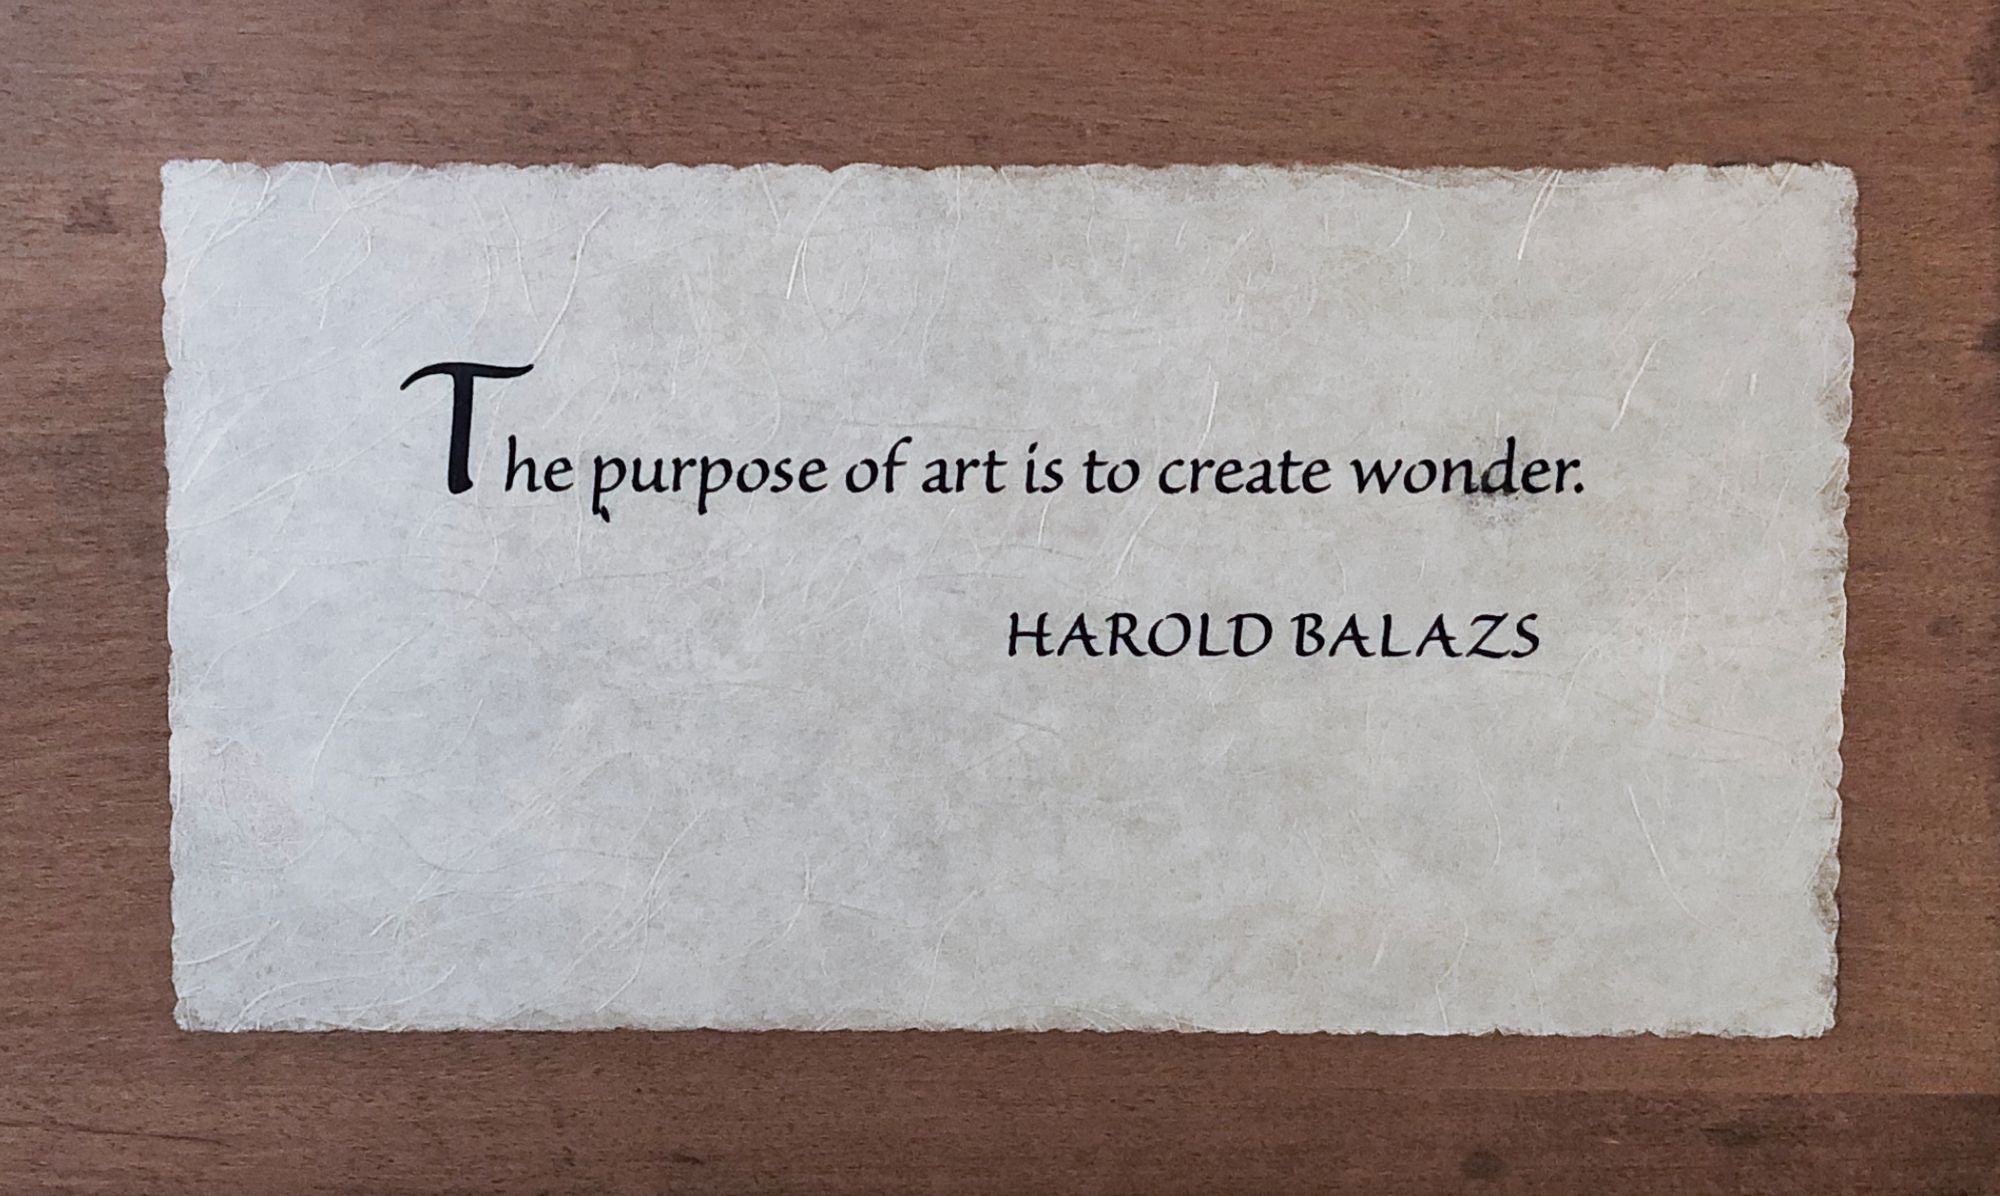 Photo of wooden plaque with Harold Balazs quote: “The purpose of art is to create wonder.”